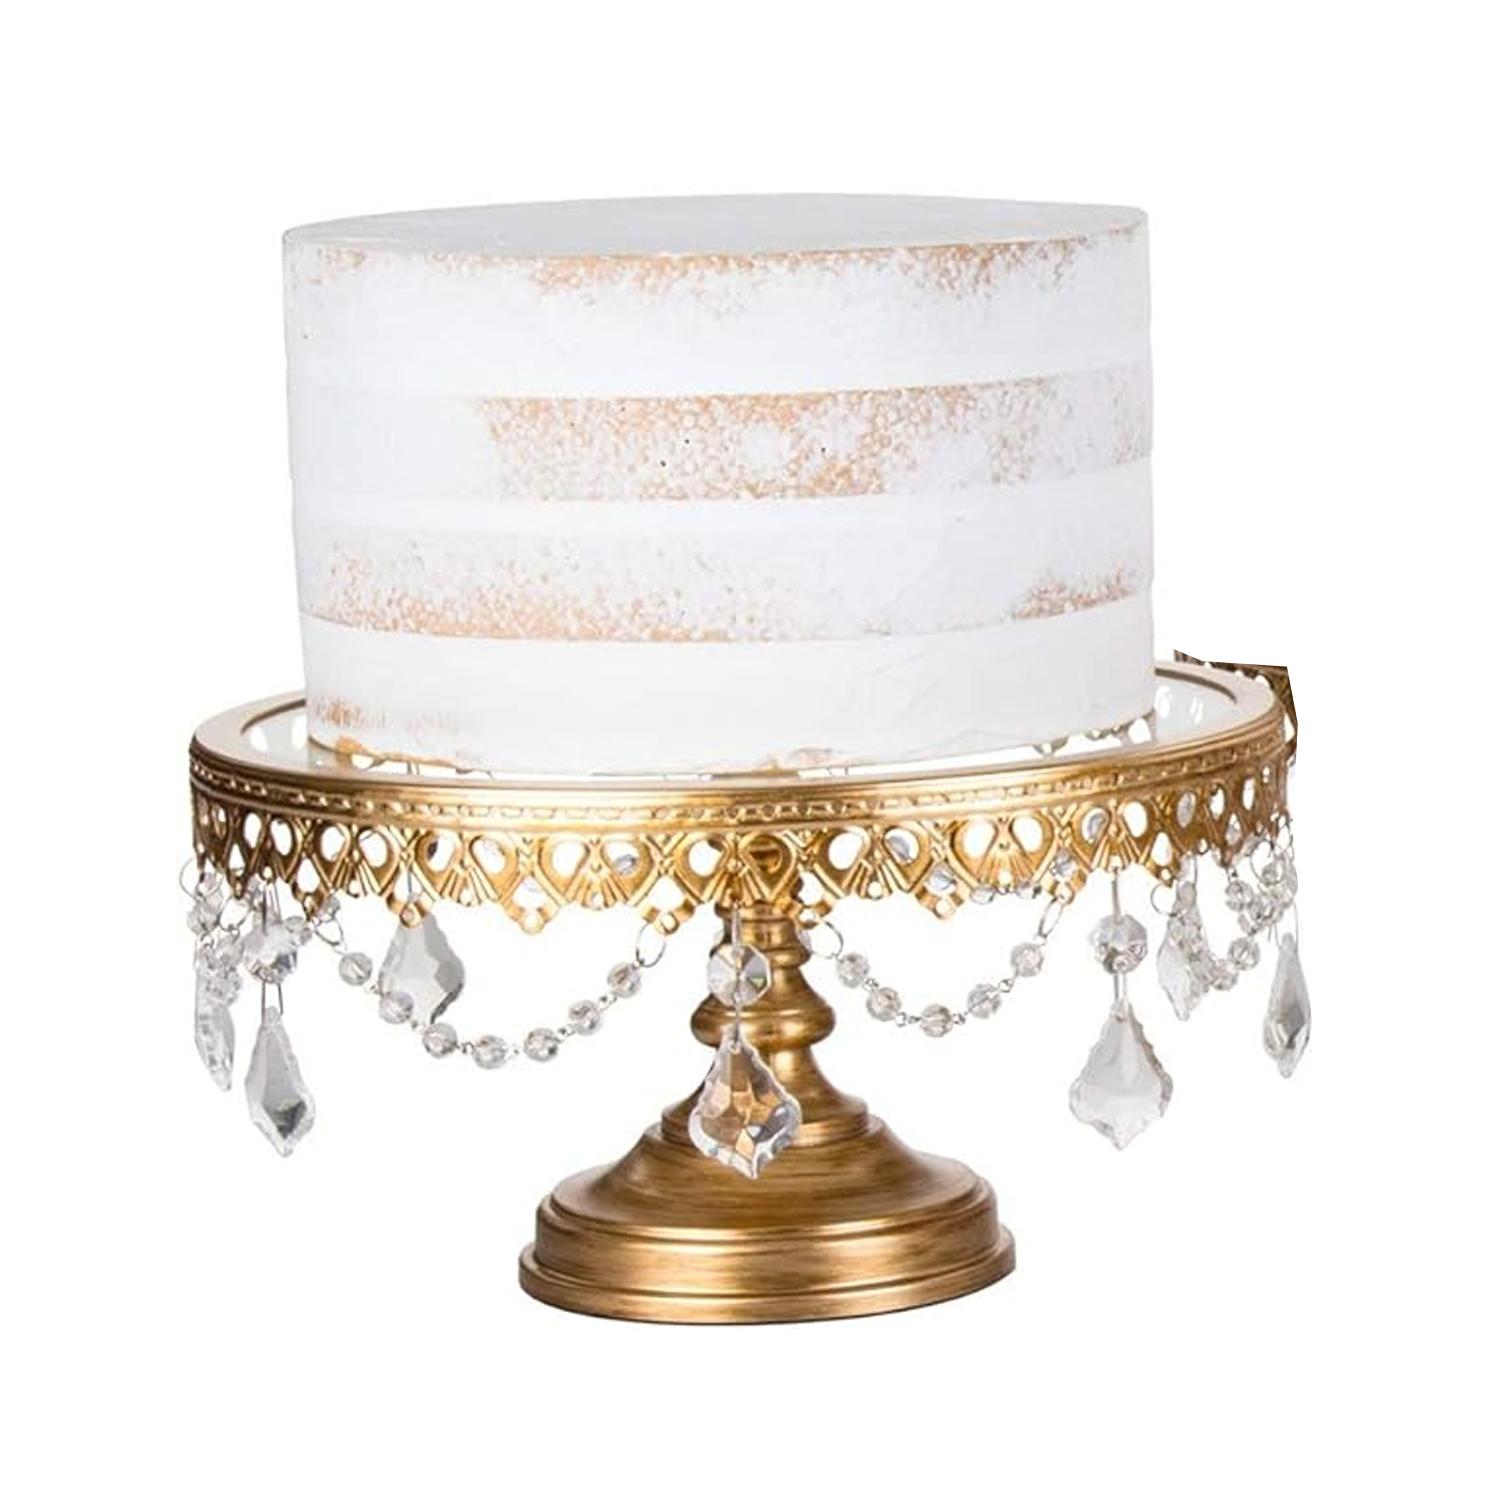 1PC GOLD CLEAR GLASS TOP CAKE STAND DIAMETER 30CM